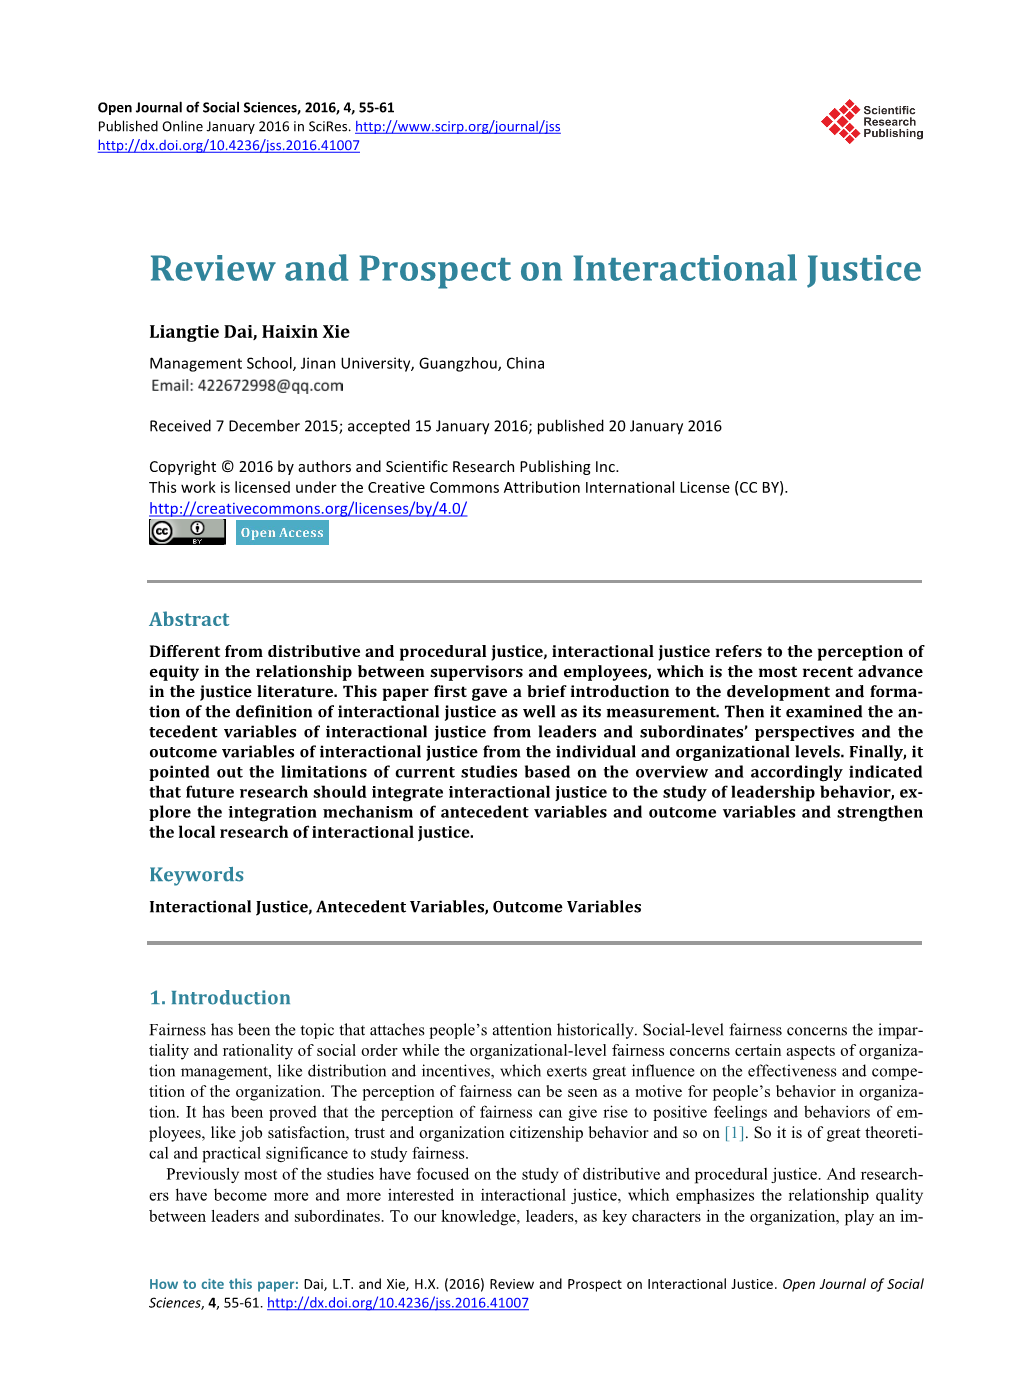 Review and Prospect on Interactional Justice